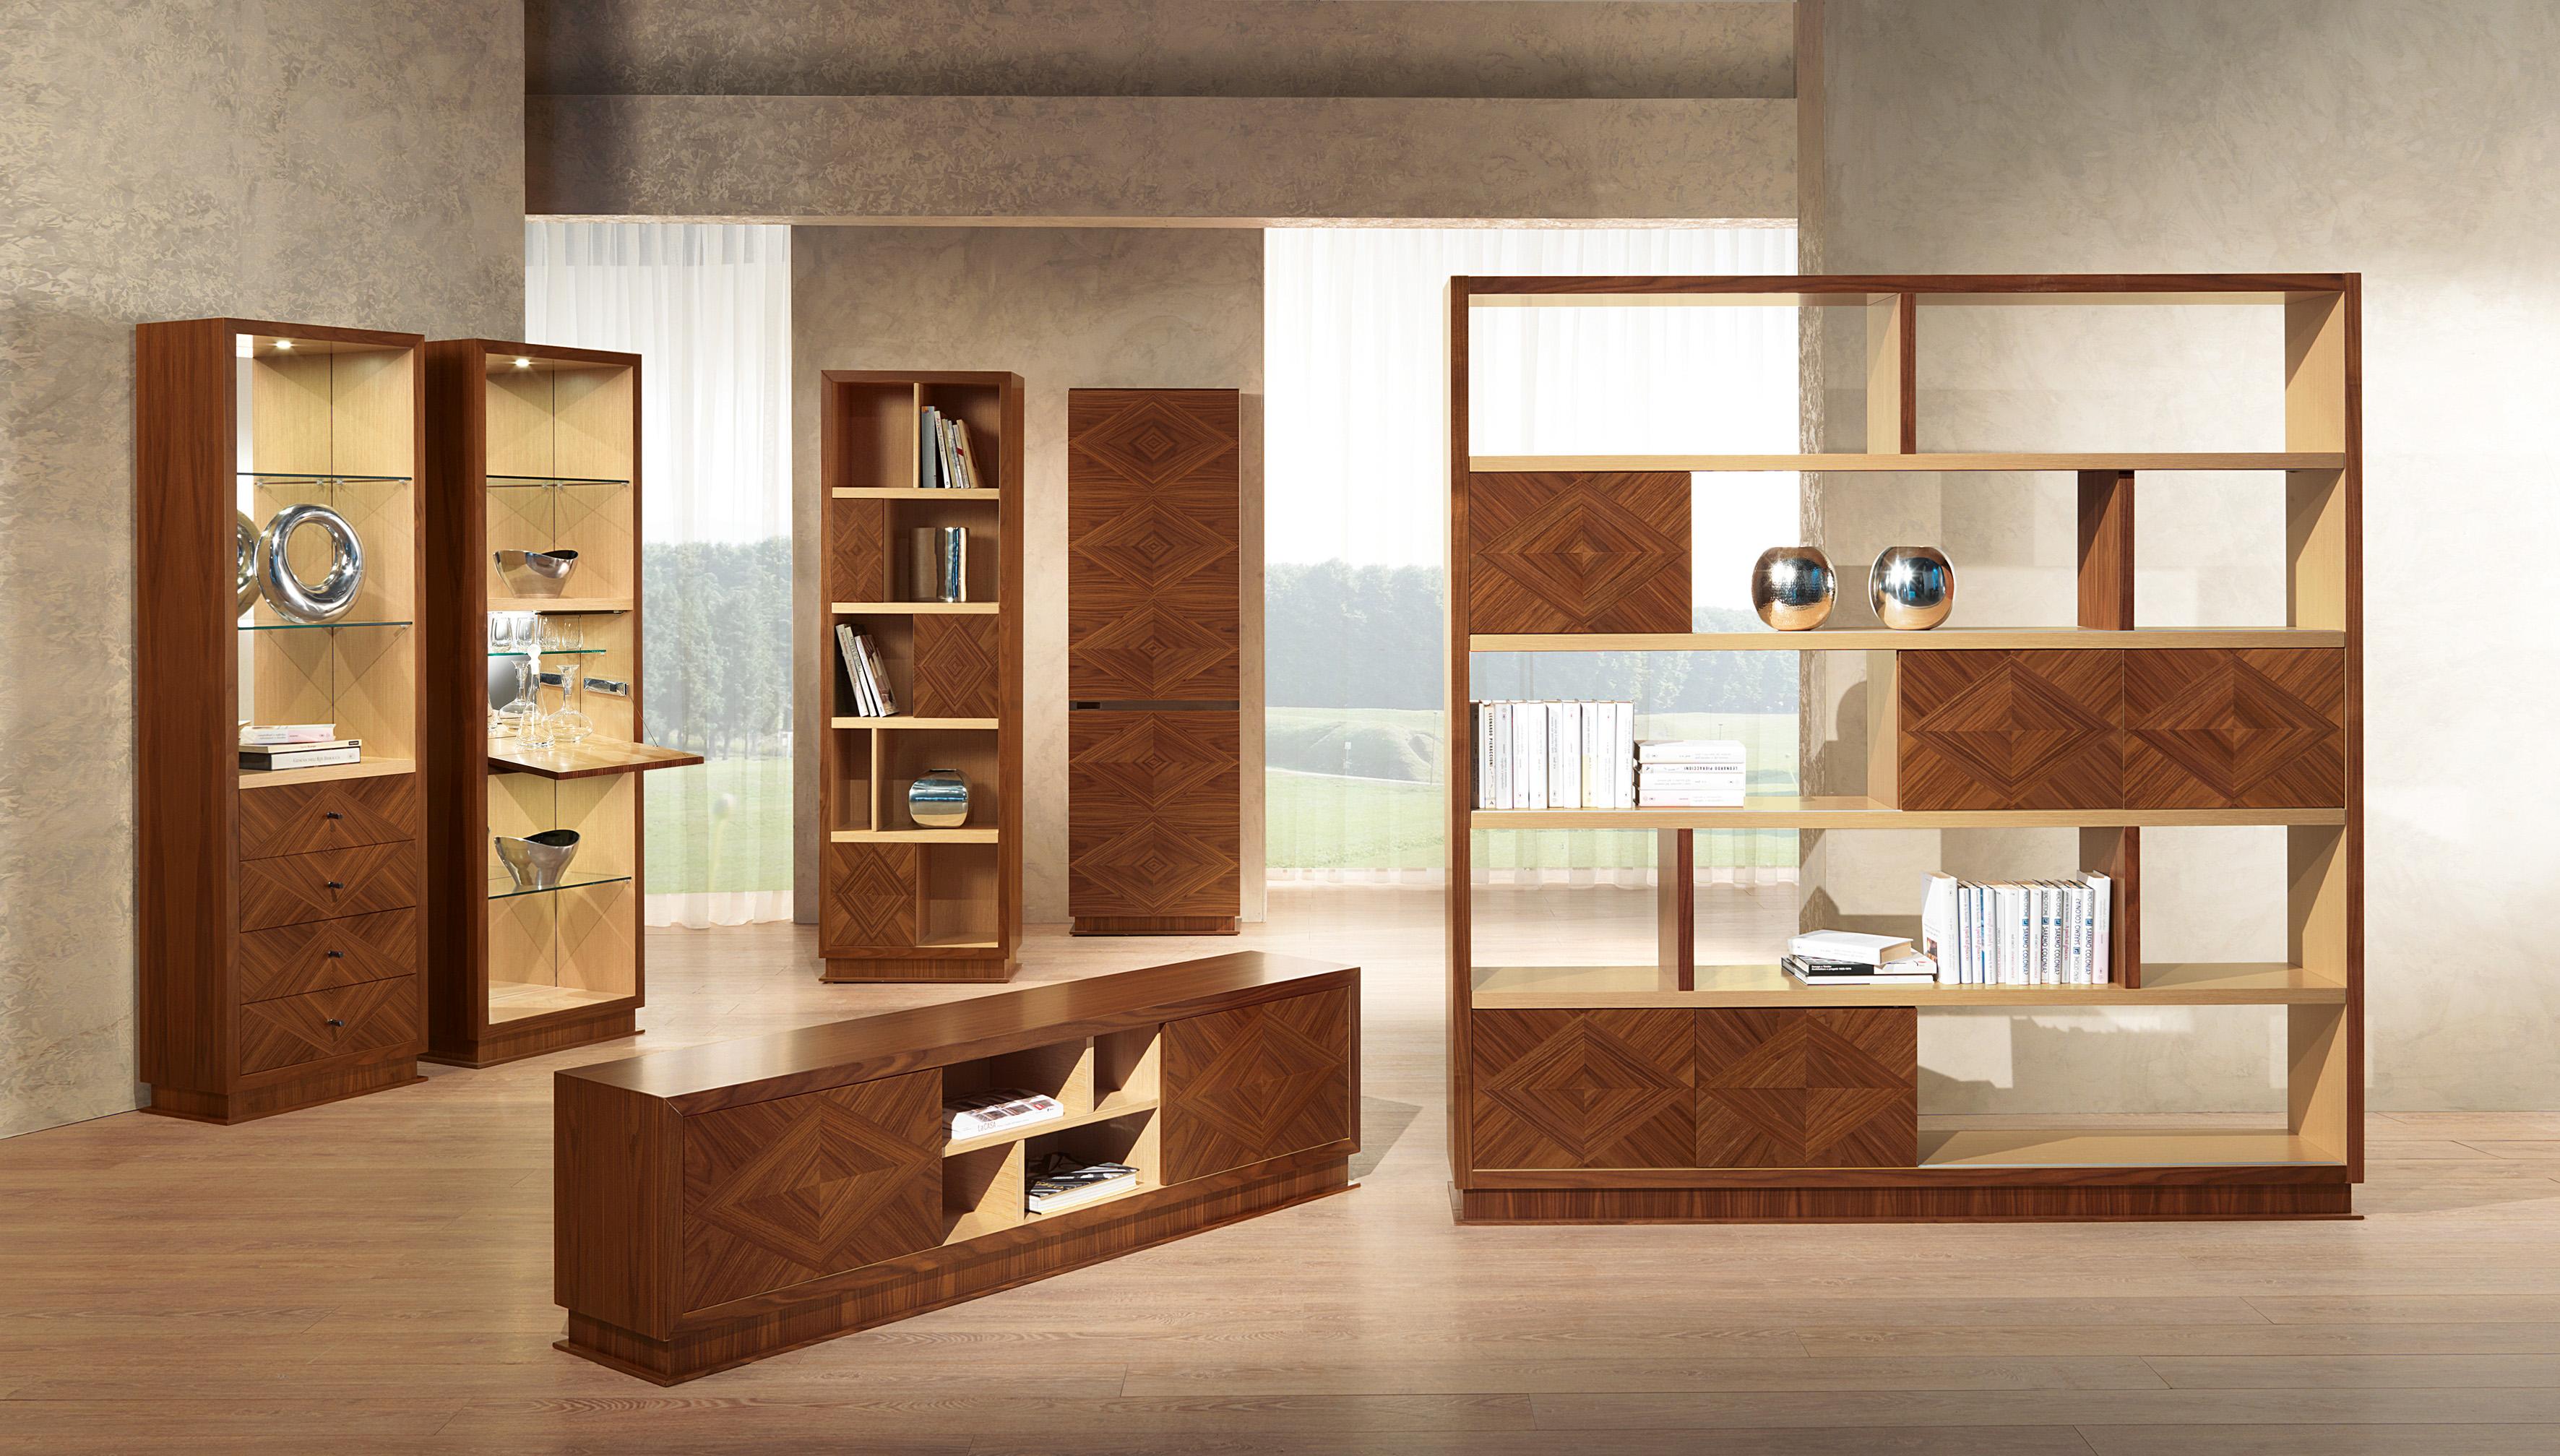 Cabinet in wood realized in Canaletta walnut and natural maple. The doors in Canaletta walnut are enriched by elegant rhombus inlays.